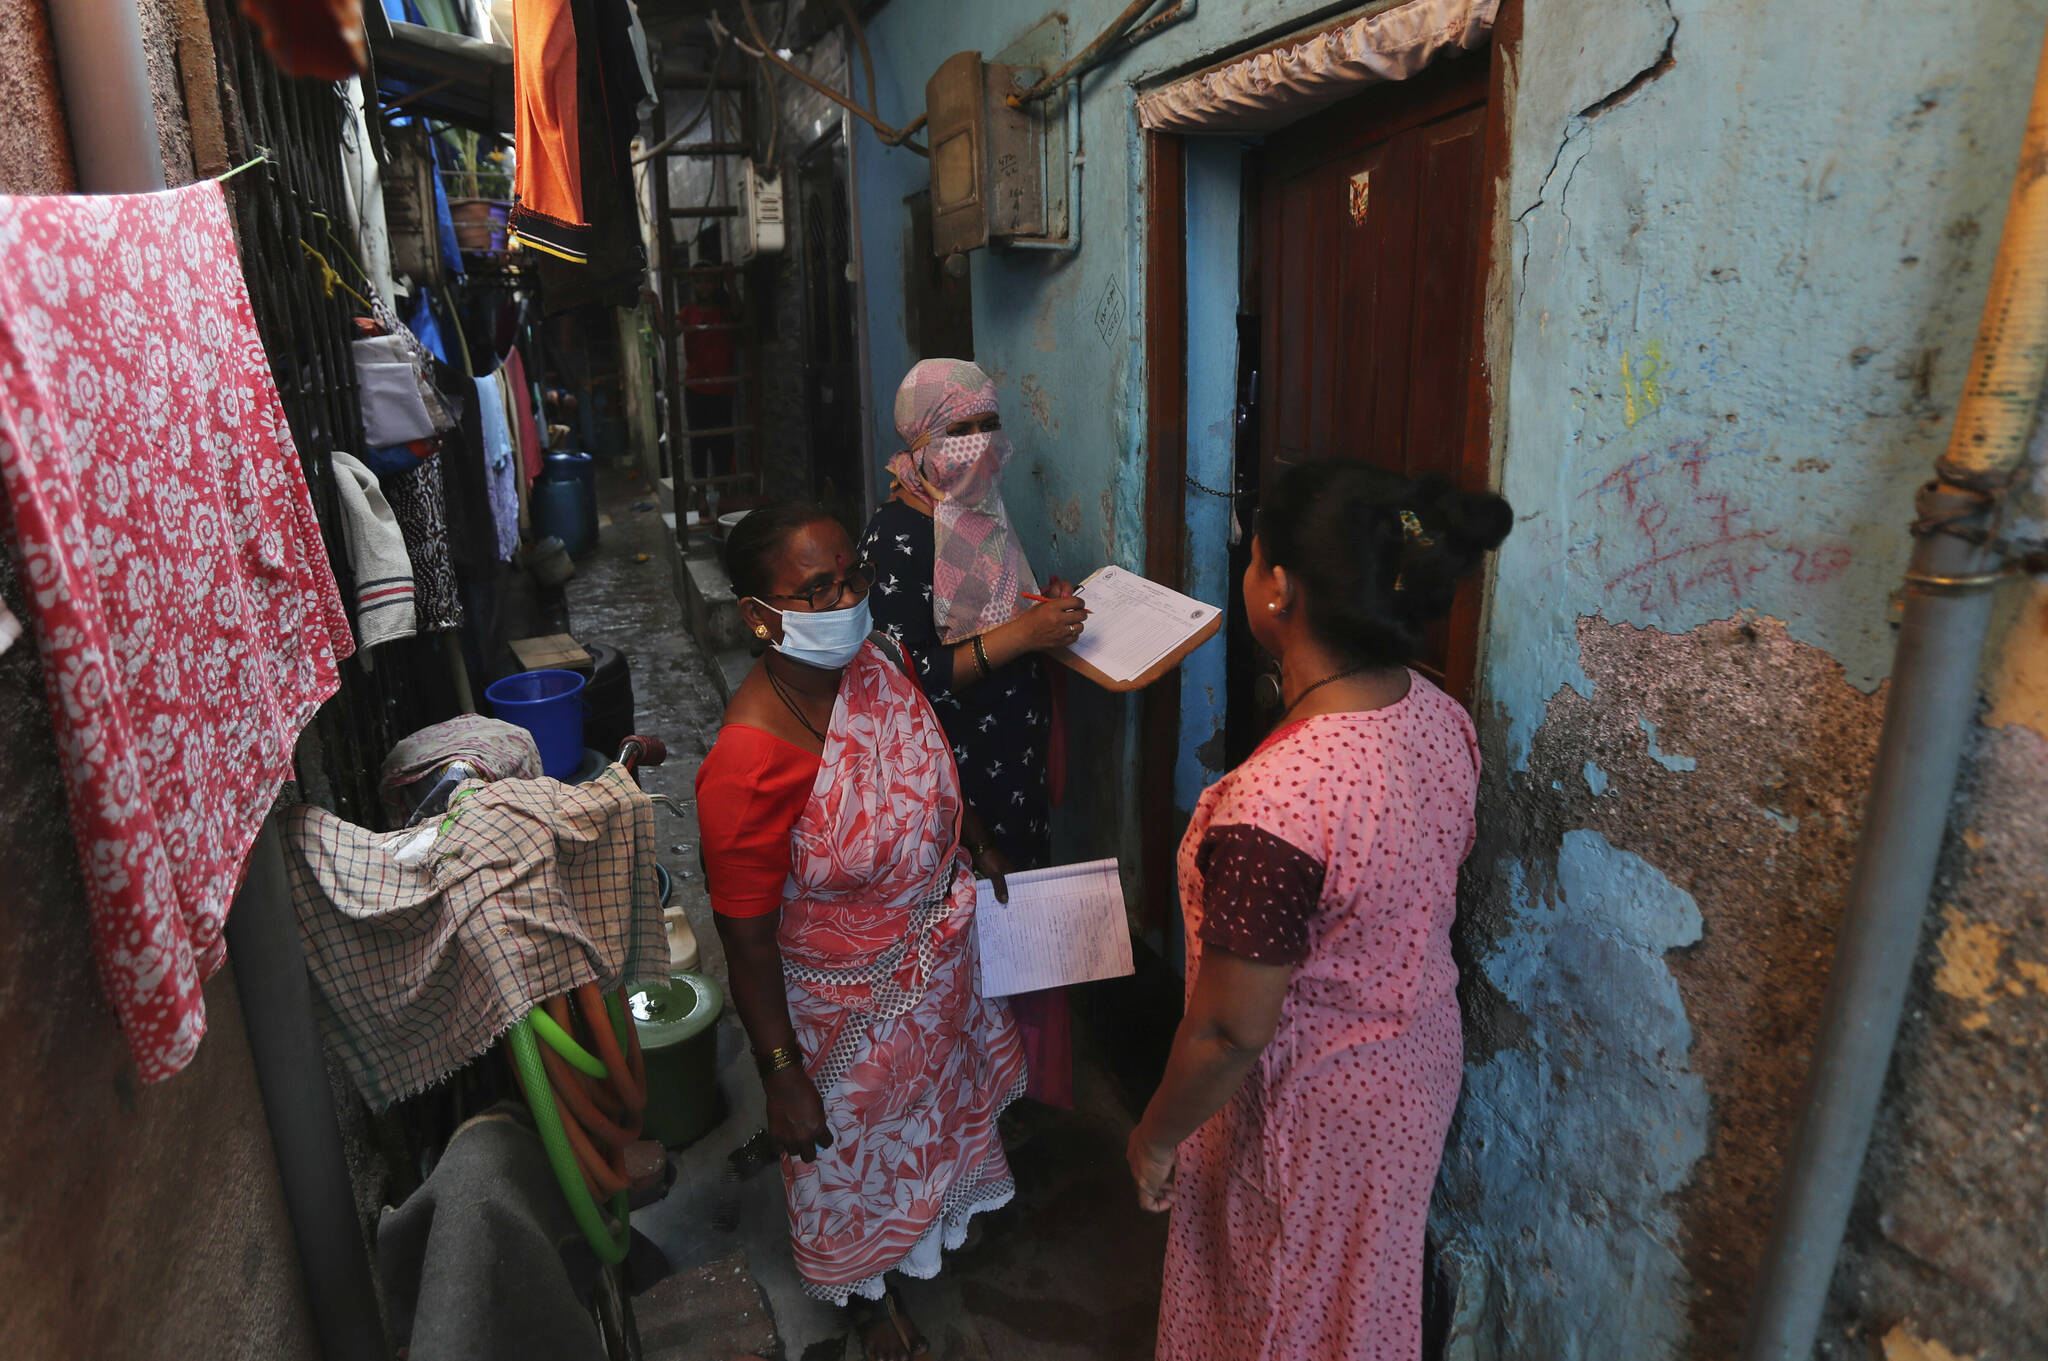 Health workers screen people for tuberculosis and leprosy in Dharavi, one of Asia’s biggest slums, in Mumbai, India, Tuesday, Dec. 1, 2020. (AP Photo/Rafiq Maqbool)